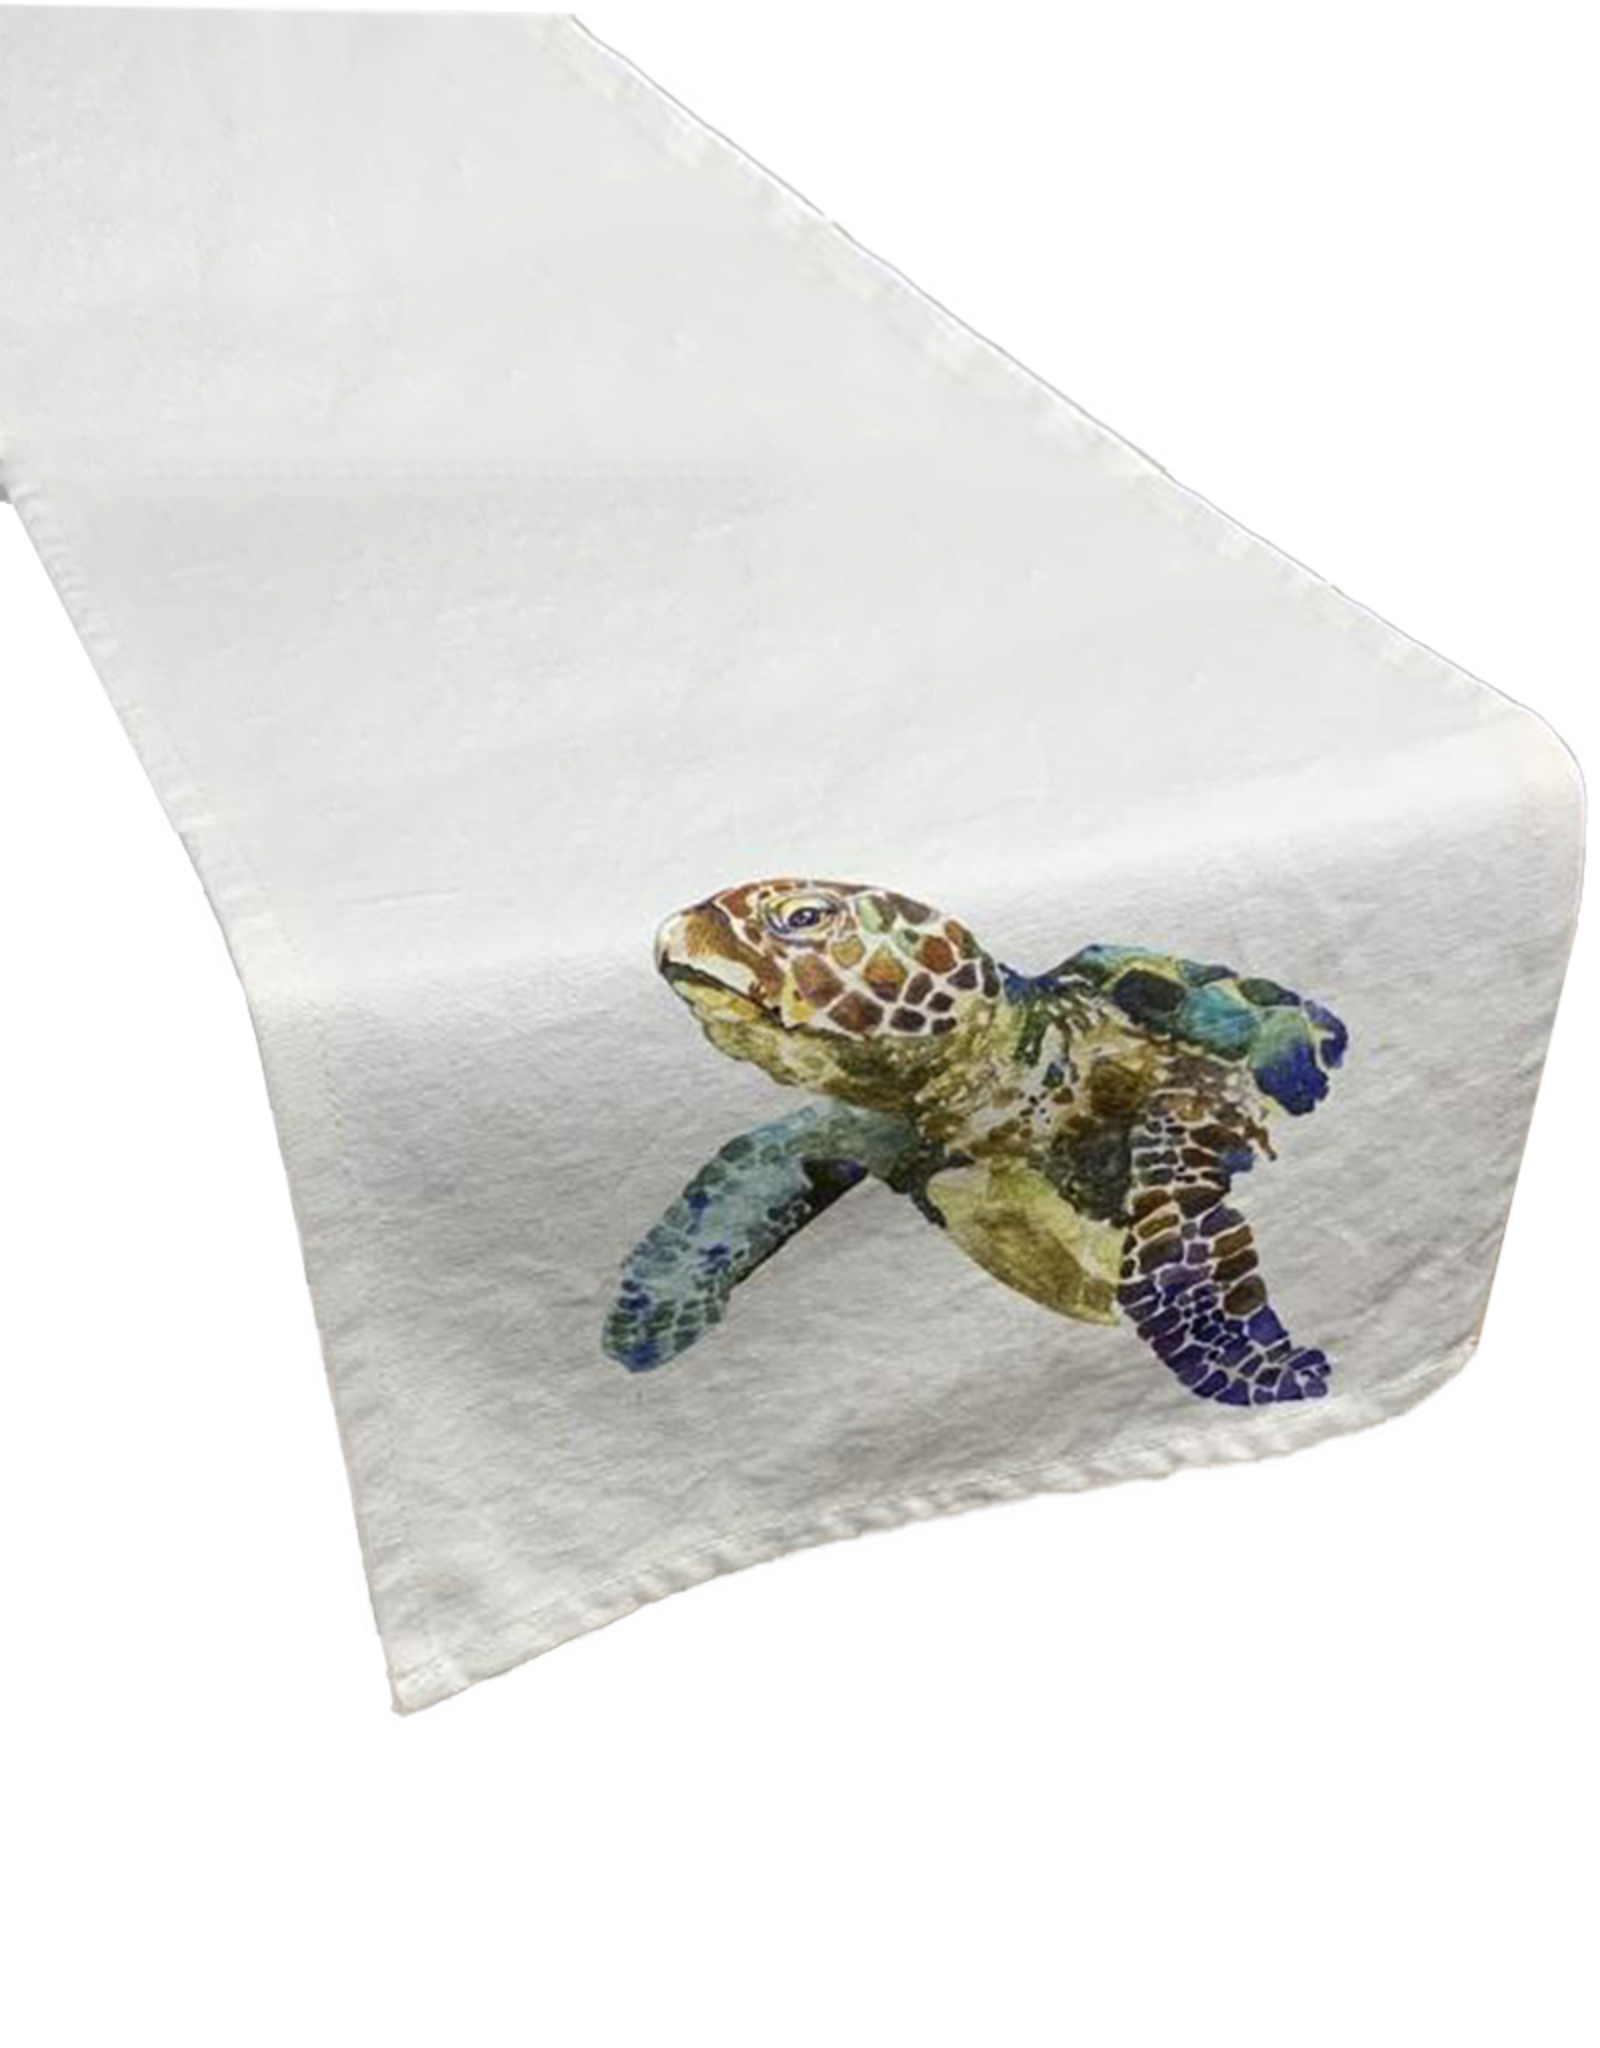 D Stevens Watercolor On Canvas Table Runner 14x72 | Sea Turtle